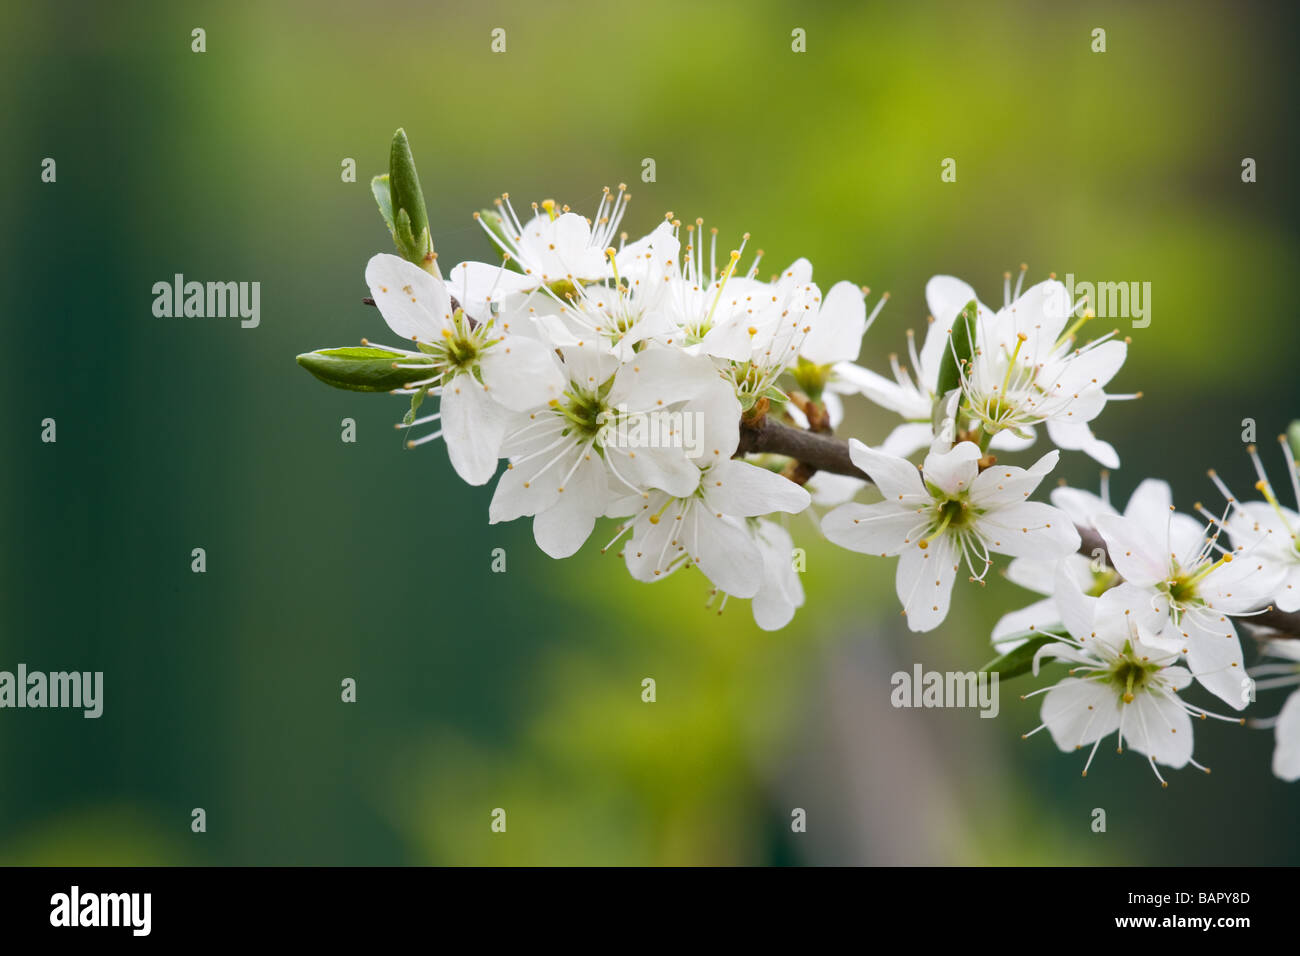 Blackthorn Prunus spinosa blossom and leaves Stock Photo